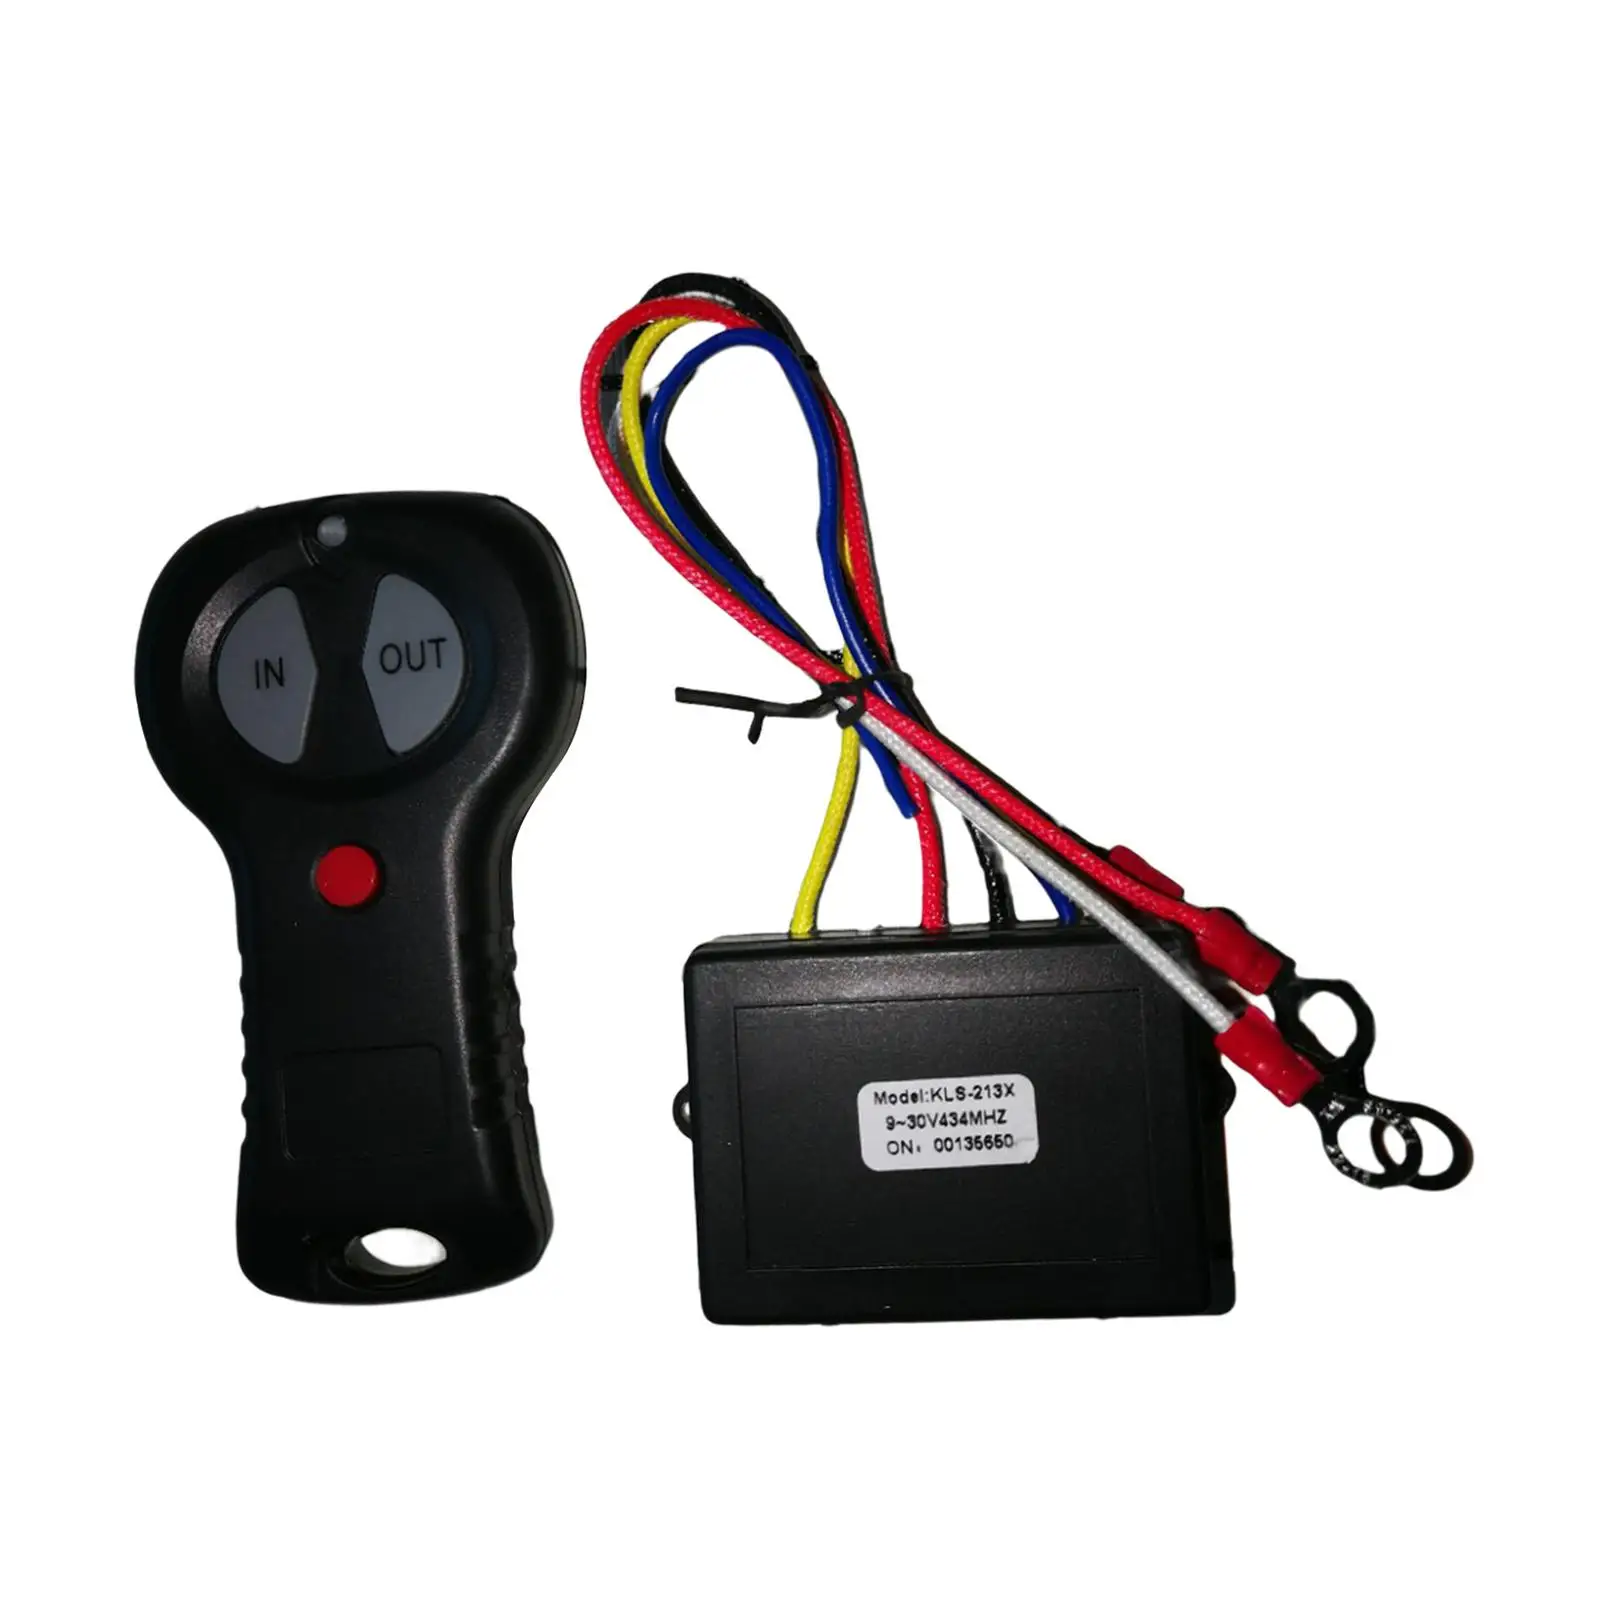 Winch Remote Control with Indicator Light Easy Install Car Truck Winch Control Accessory Switch Handset for Trucks Auto ATV